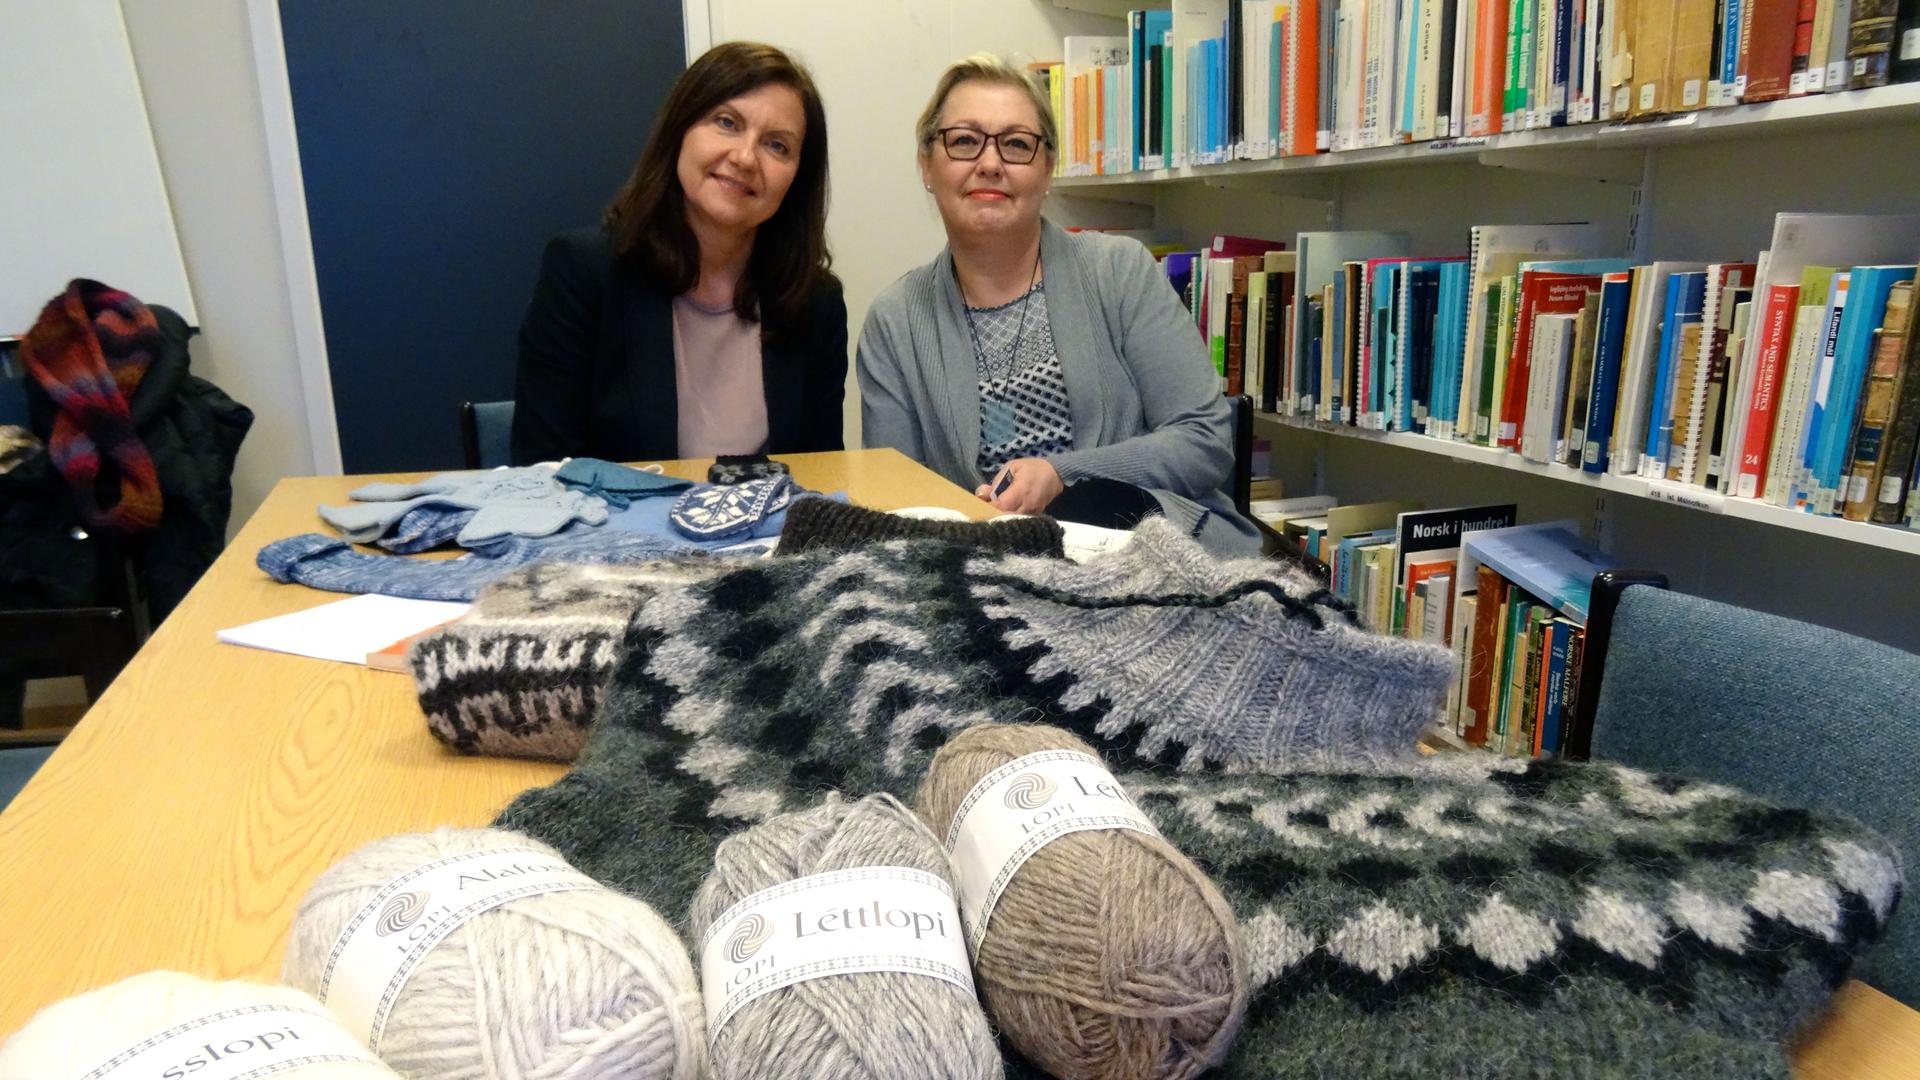 Hulda Hákonardóttir and Guðrún Hannele Henttinen help come up with new Icelandic words as part of the Iceland's knitting language committee.